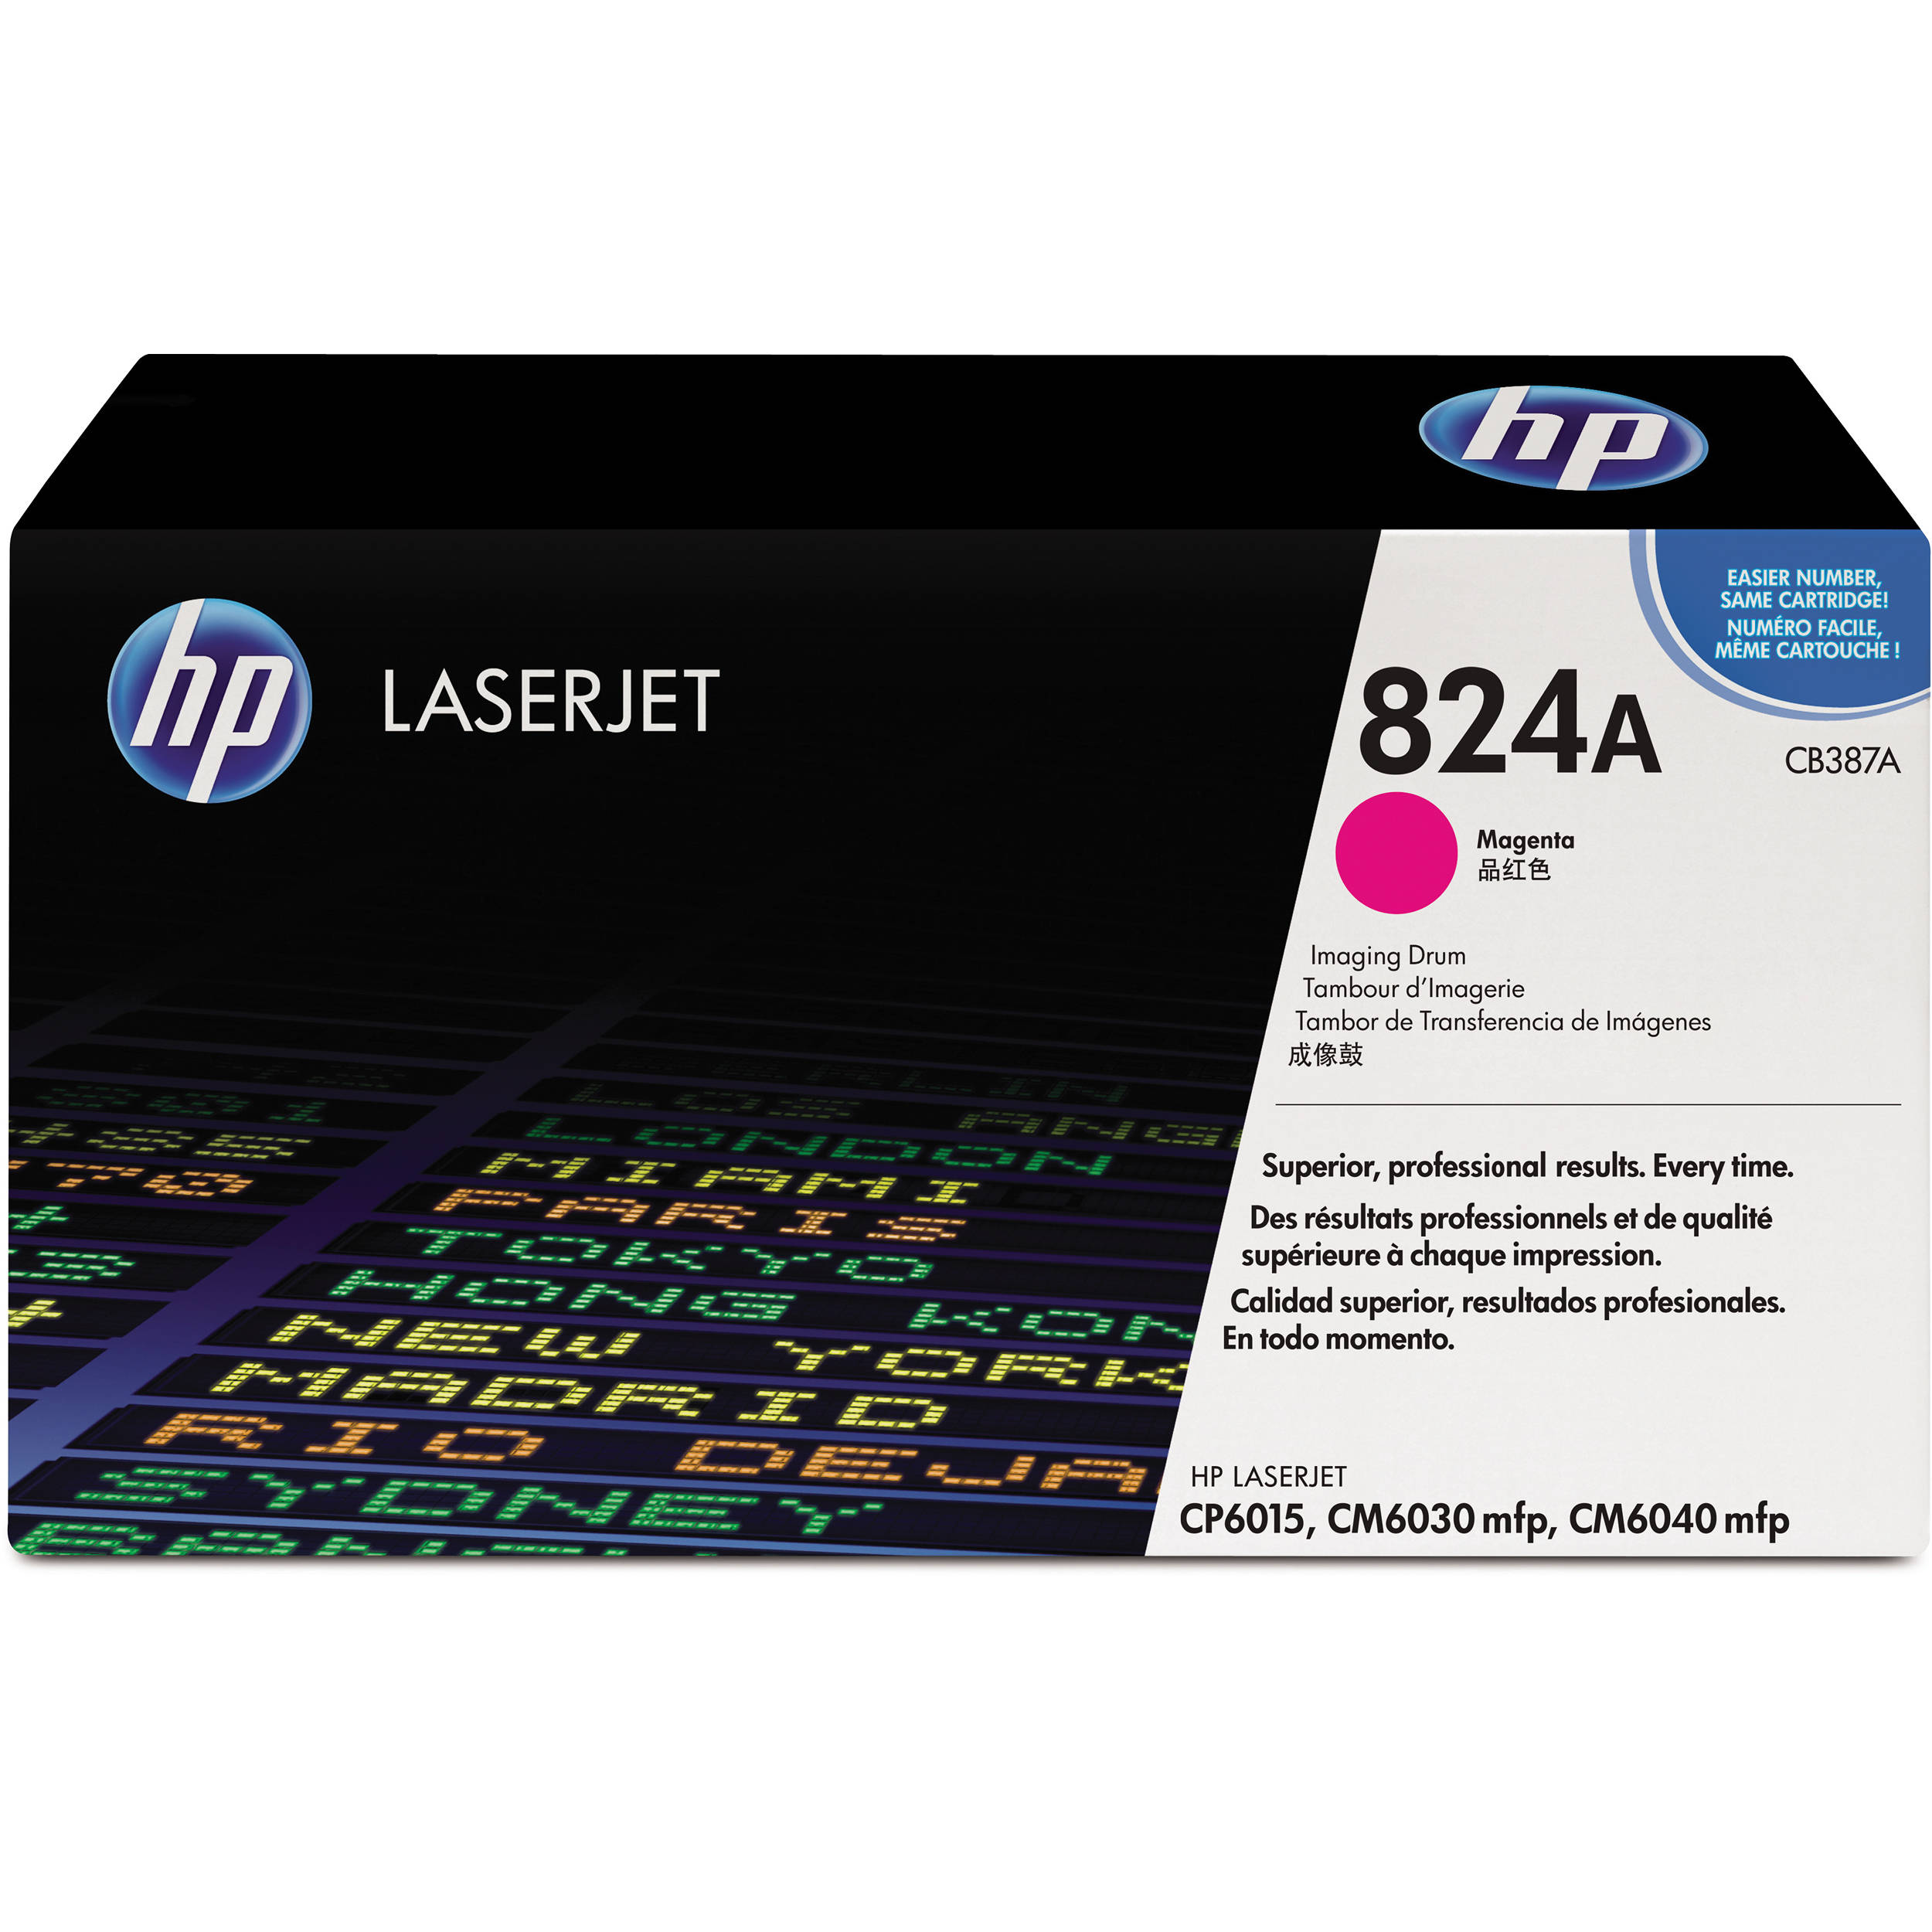 Download Hp 824a Yellow Image Drum For Hp Color Laserjet Toner Cb386a B H Yellowimages Mockups